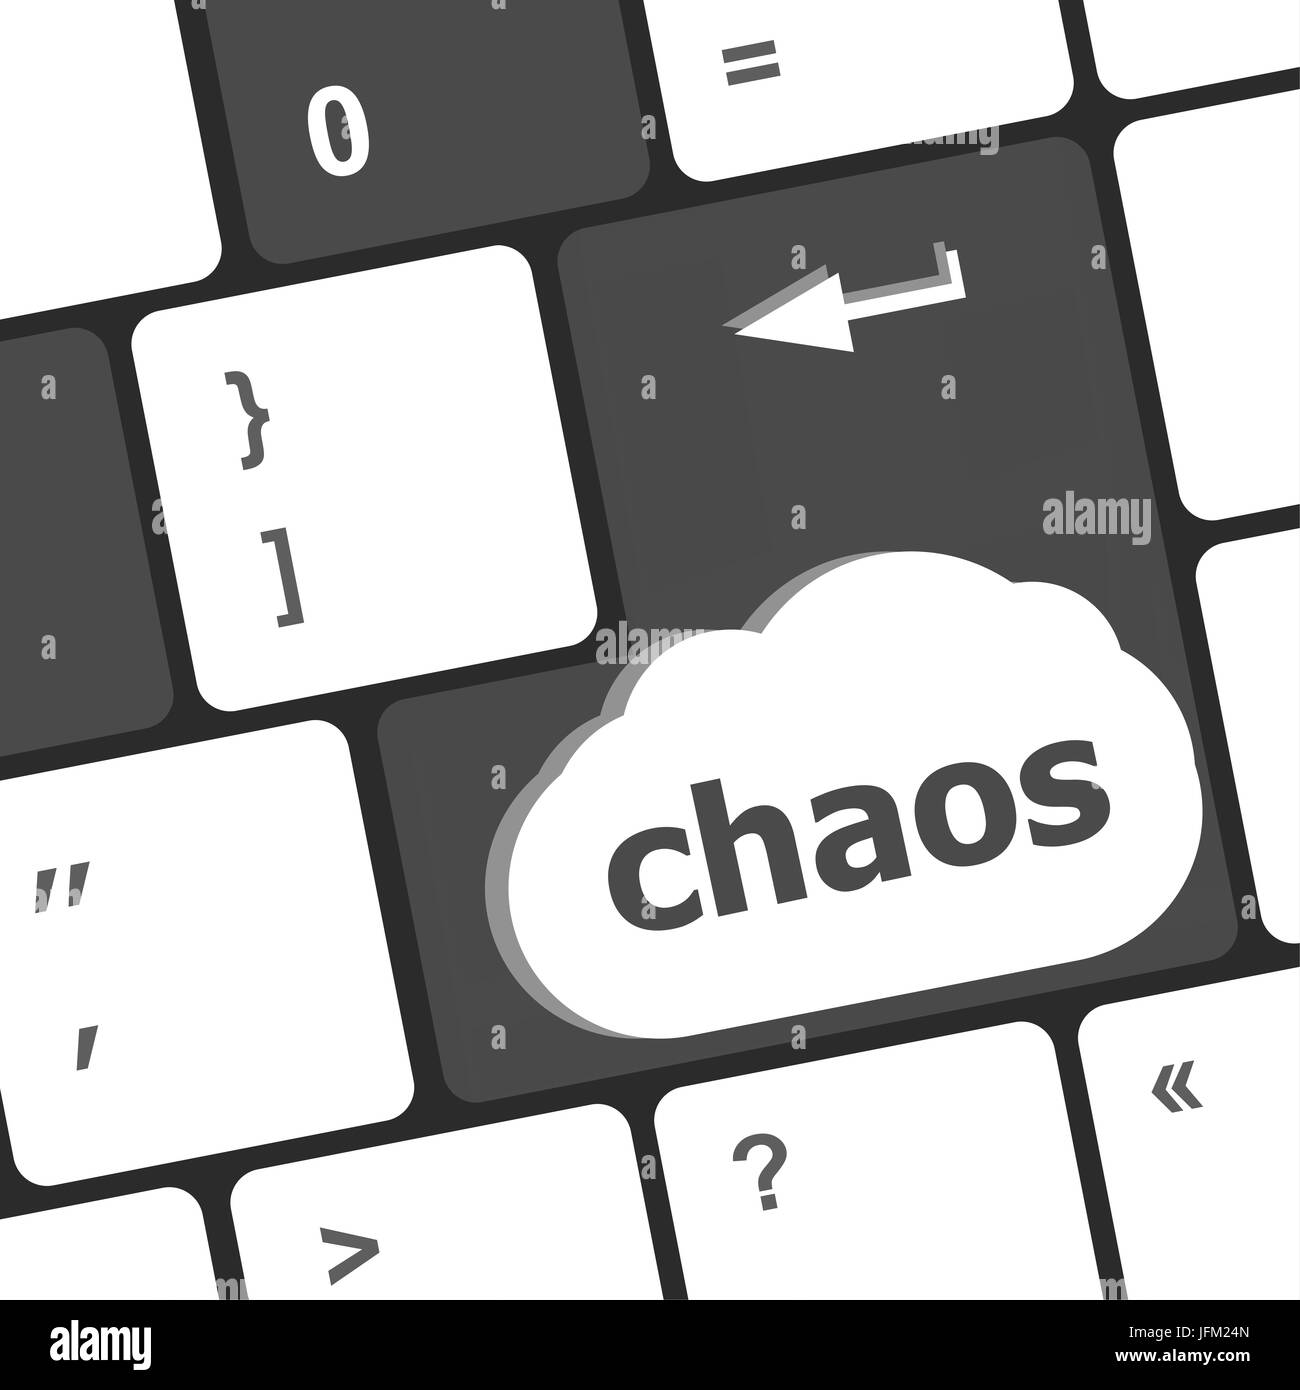 chaos keys on computer keyboard, business concept Stock Photo